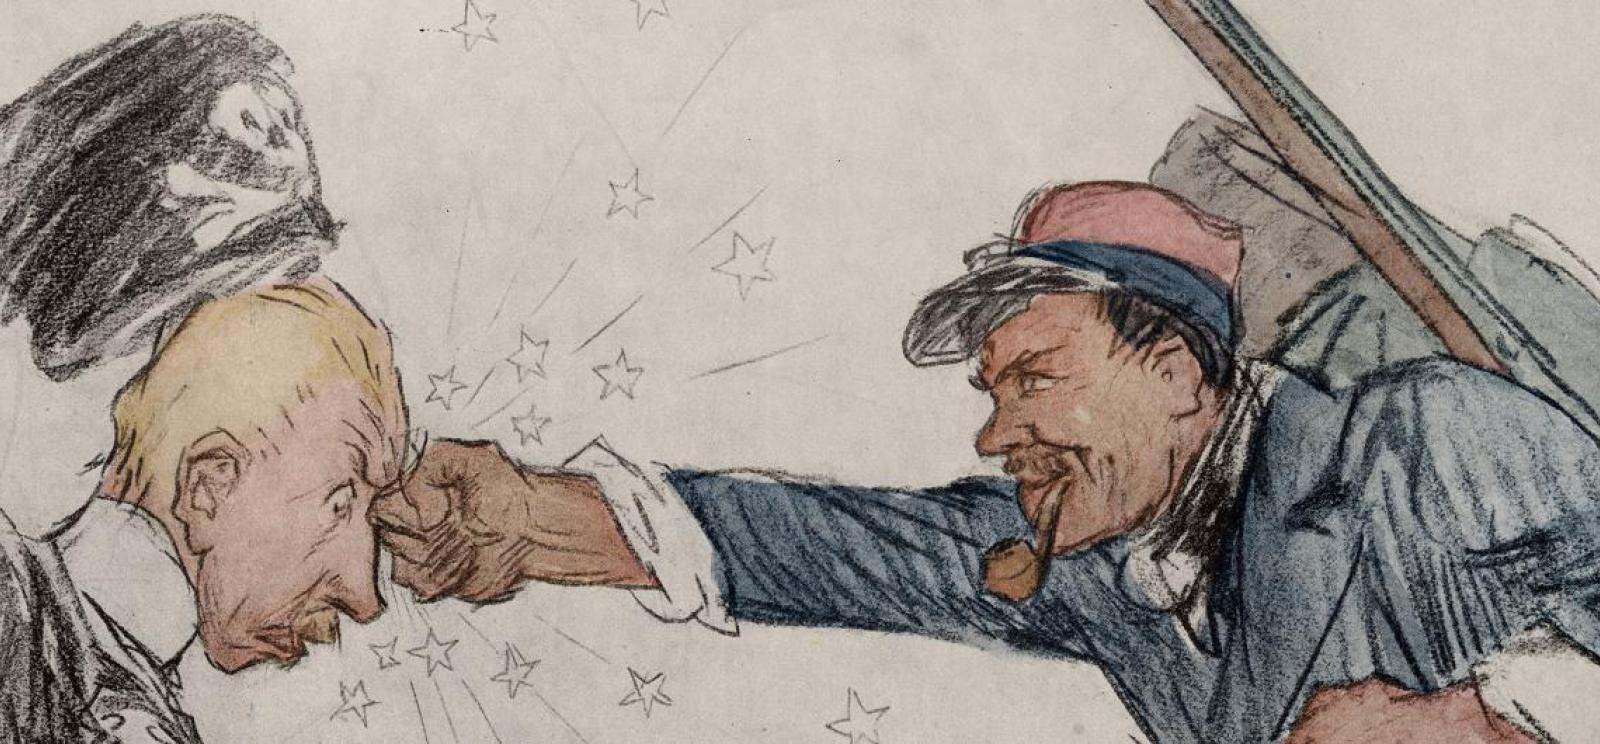 Drawn to War: The Political Cartoons of Louis Raemaekers | National WWI  Museum and Memorial